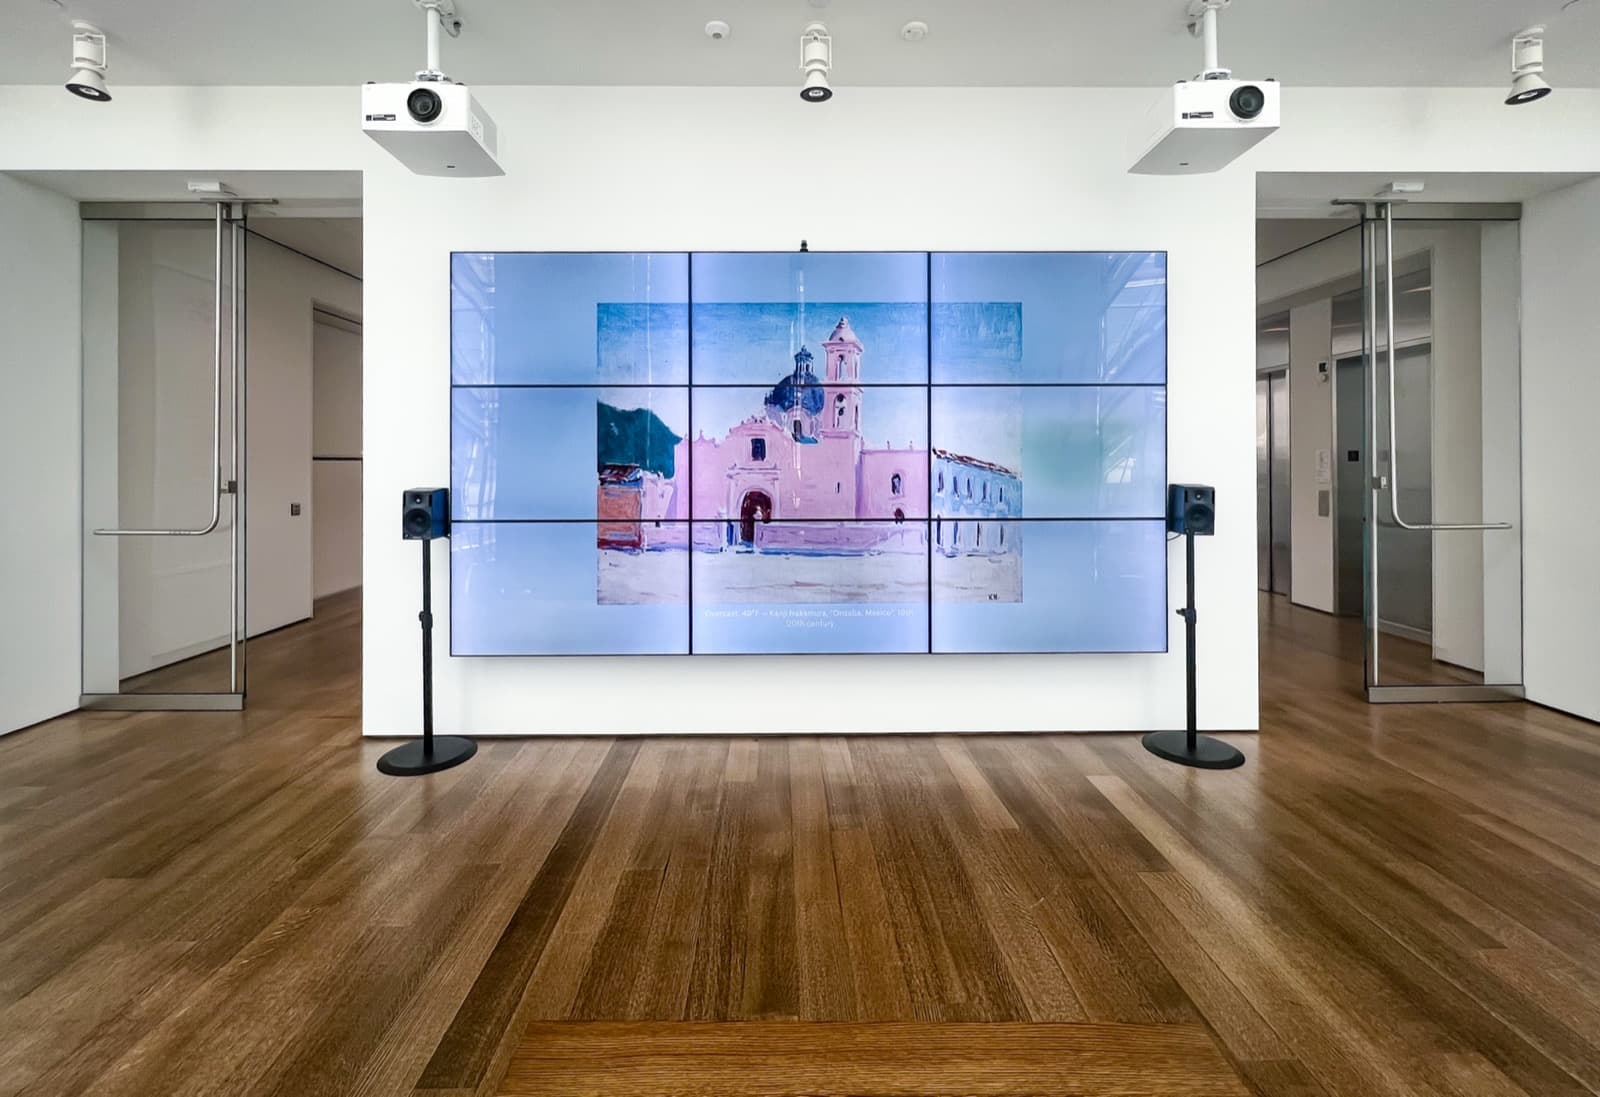 An installation shot of a Harvart Art Museum gallery with a large screen on the wall. The screen shows a picture of a painting from the museum's digital collection on a blurred background of the sky. The image is captioned with the current weather (Overcast, 45°F) and the artwork's title and artist